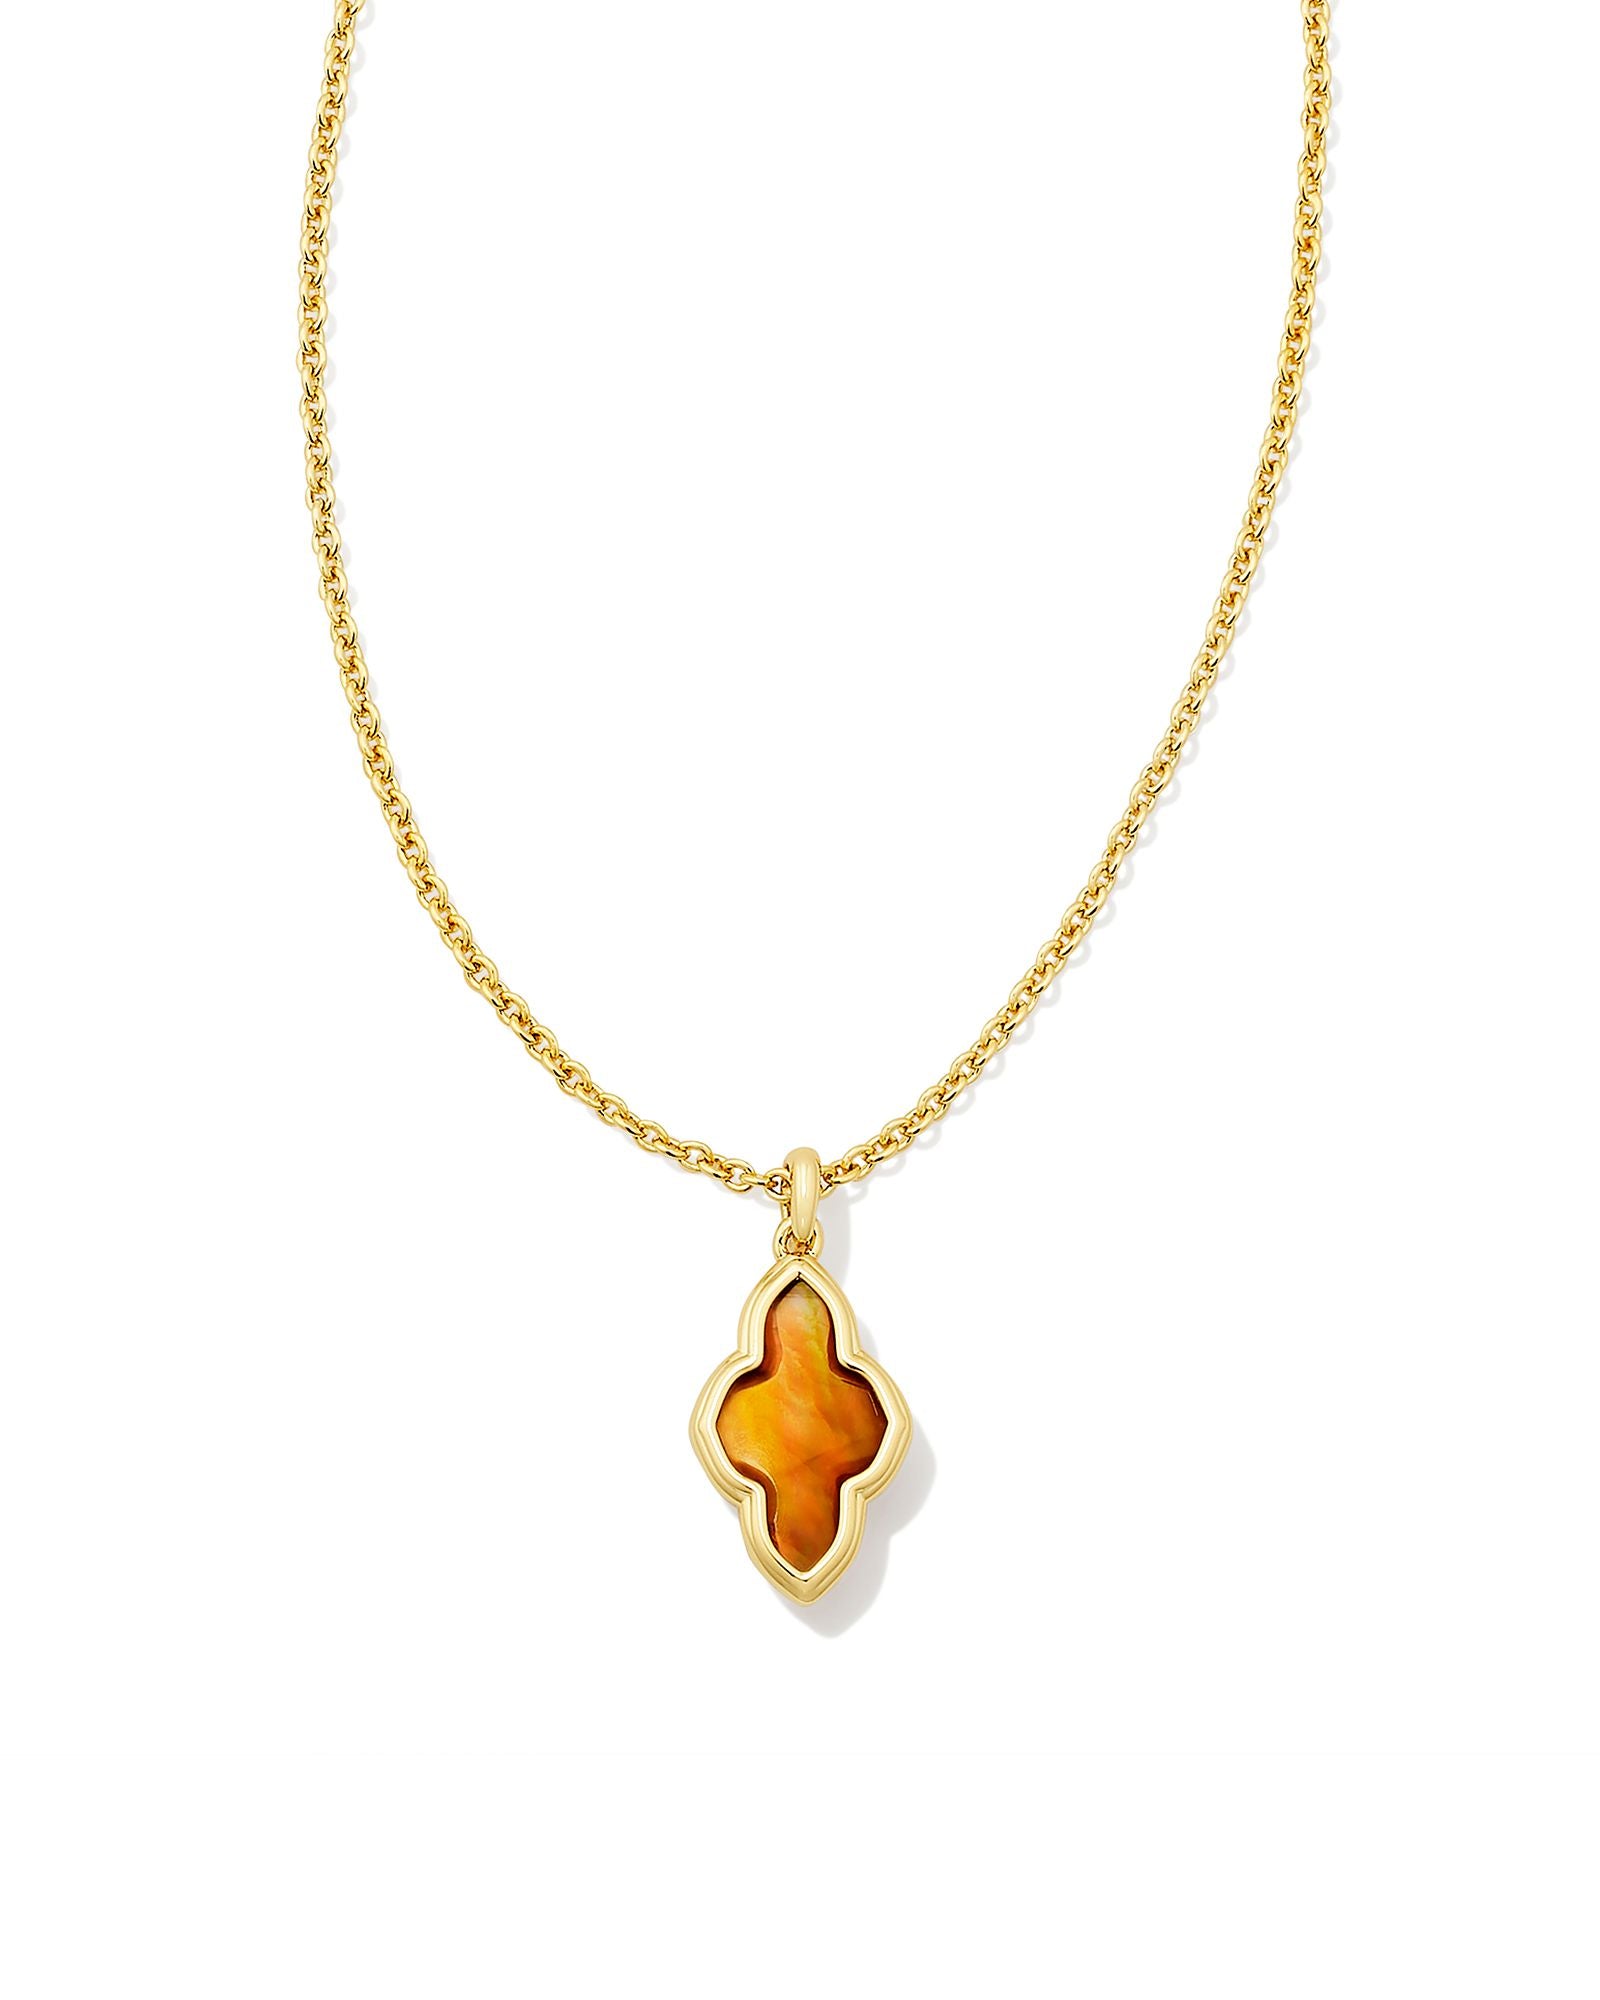 Kendra Scott Abbie Pendant Necklace in Marbled Amber Illusion and Gold Plated